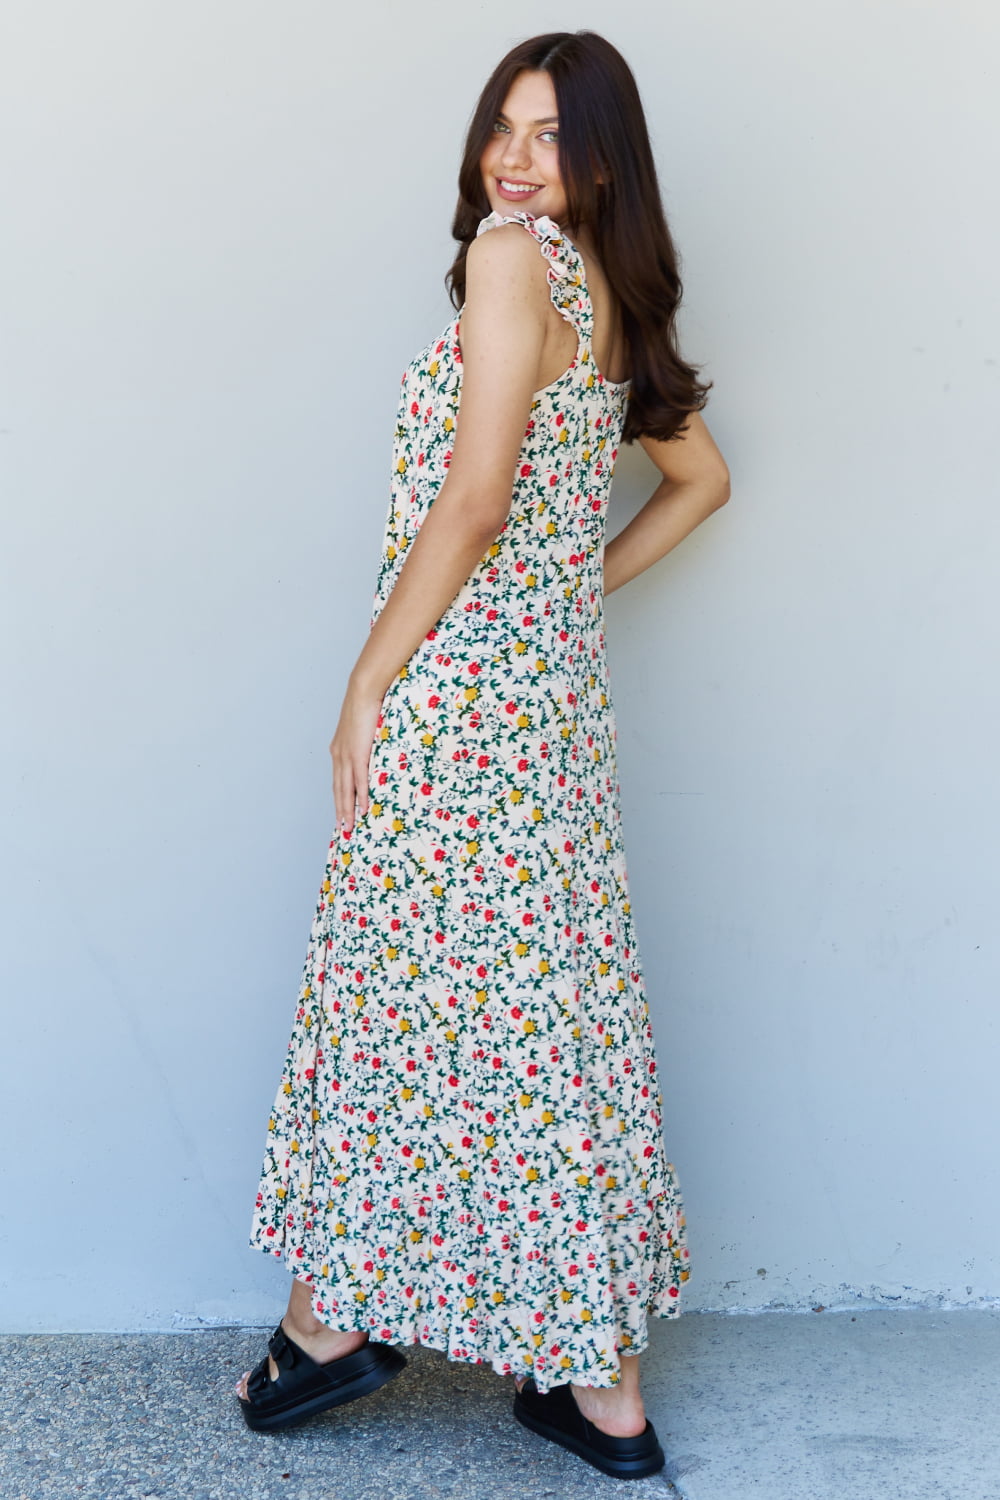 The Garden Ruffle Floral Maxi Dress in Natural Rose - All Dresses - Dresses - 2 - 2024